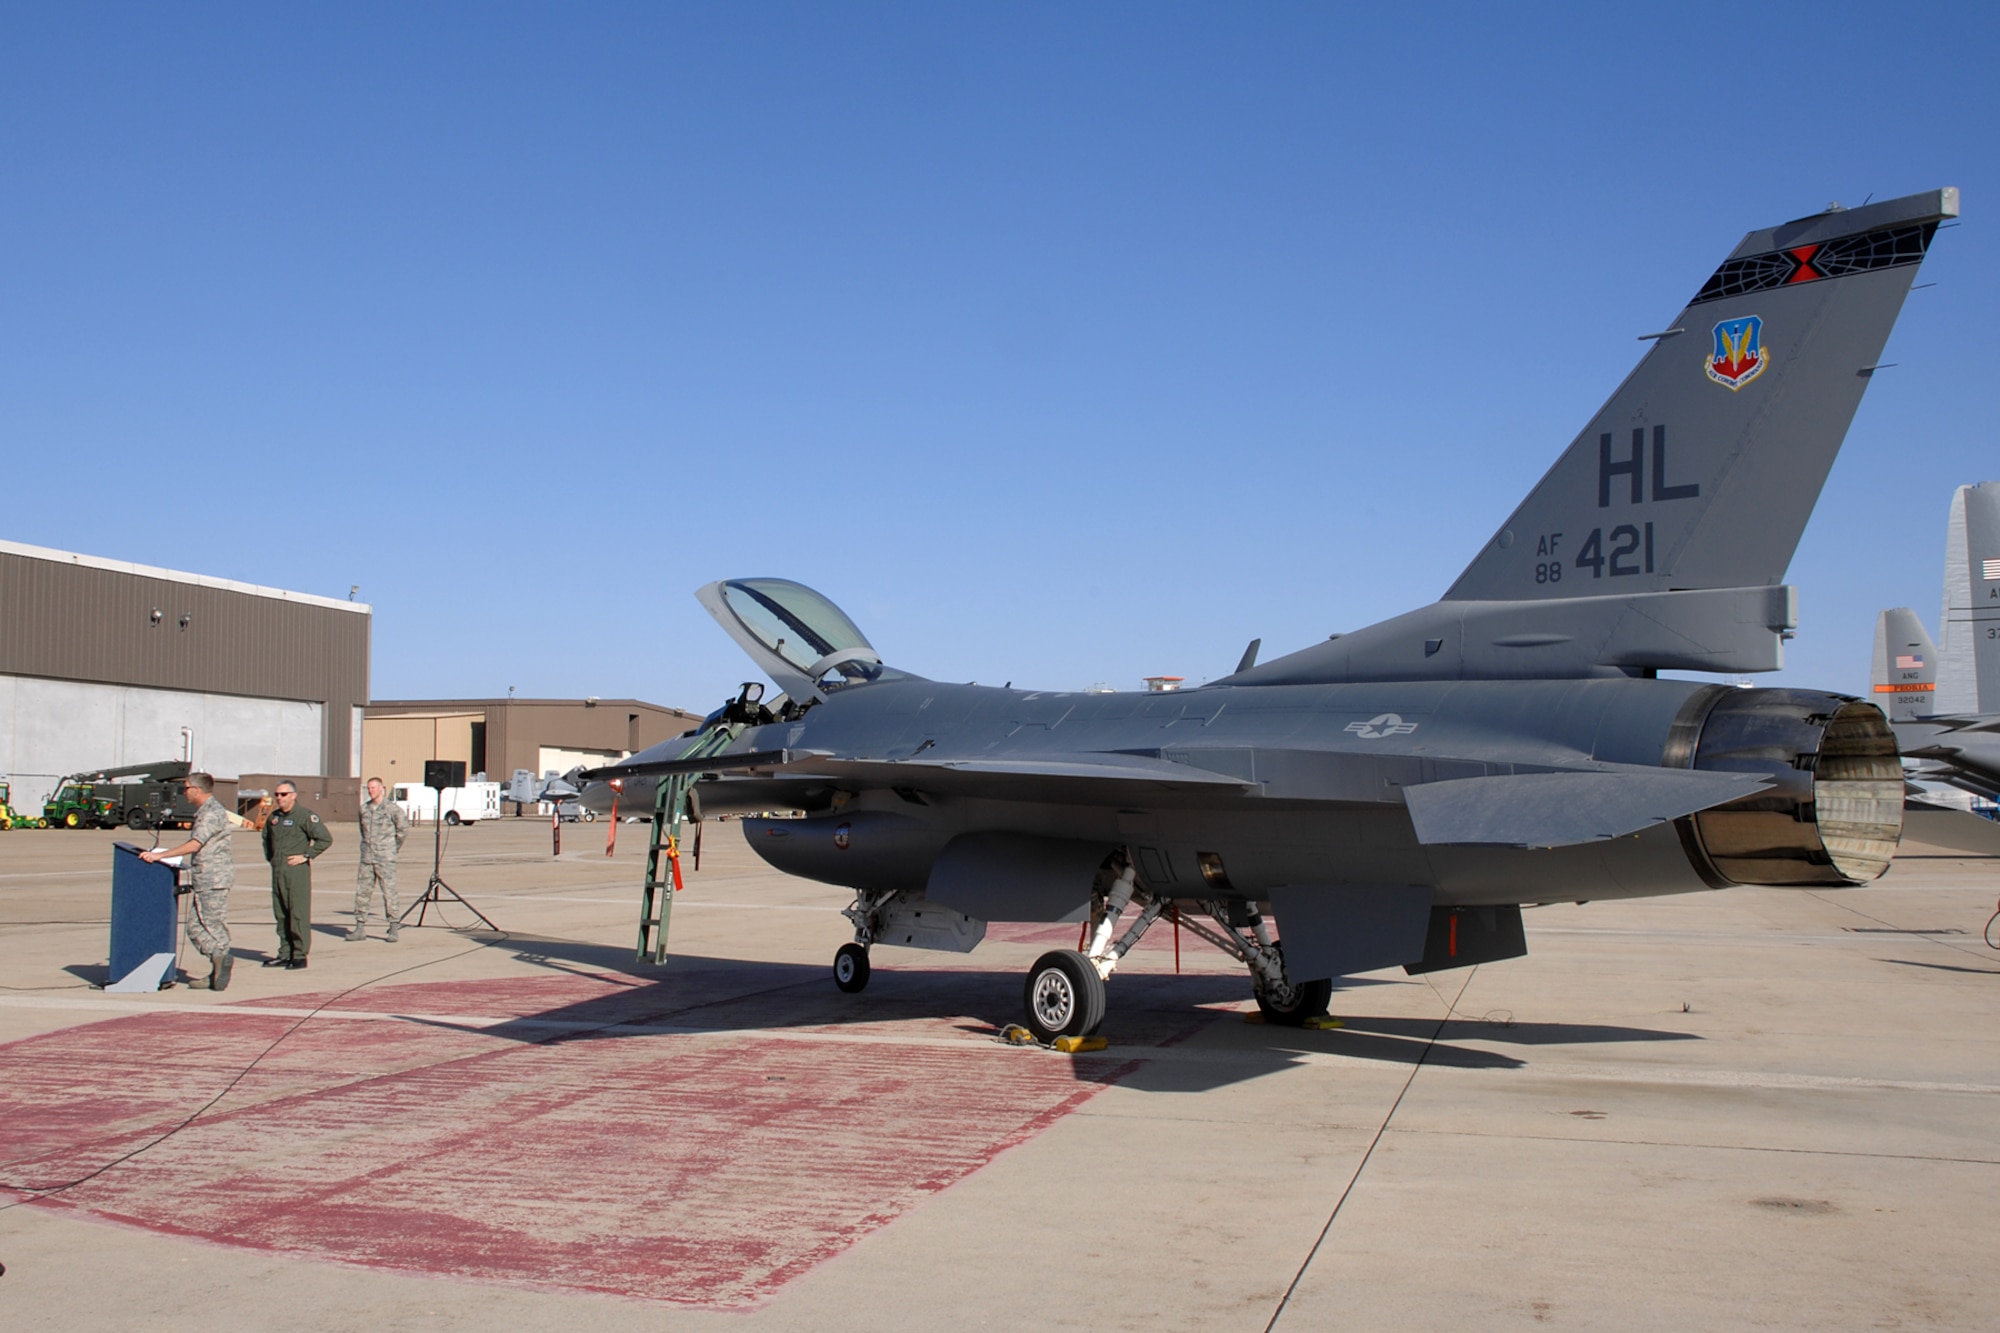 The final 388th Fighter Wing Block 40 F-16 to undergo Common Configuration Implementation Program upgrades is handed over to Col. Scott Dennis, 388th FW commander, in a ceremony April 21.  Beginning in November 2005, depot workers from the 309th Maintenance Wing, led by Brig. Gen. Art Cameron, invested over 5,500 maintenance hours into each of 388th FW's 72 aircraft.  CCIP brings upgraded avionics and communications systems to pilots in combat.  Hill's 4th Fighter Squadron was the first to fly CCIP F-16s in combat in August 2007.  (U.S. Air Force photo by Alex Lloyd) 